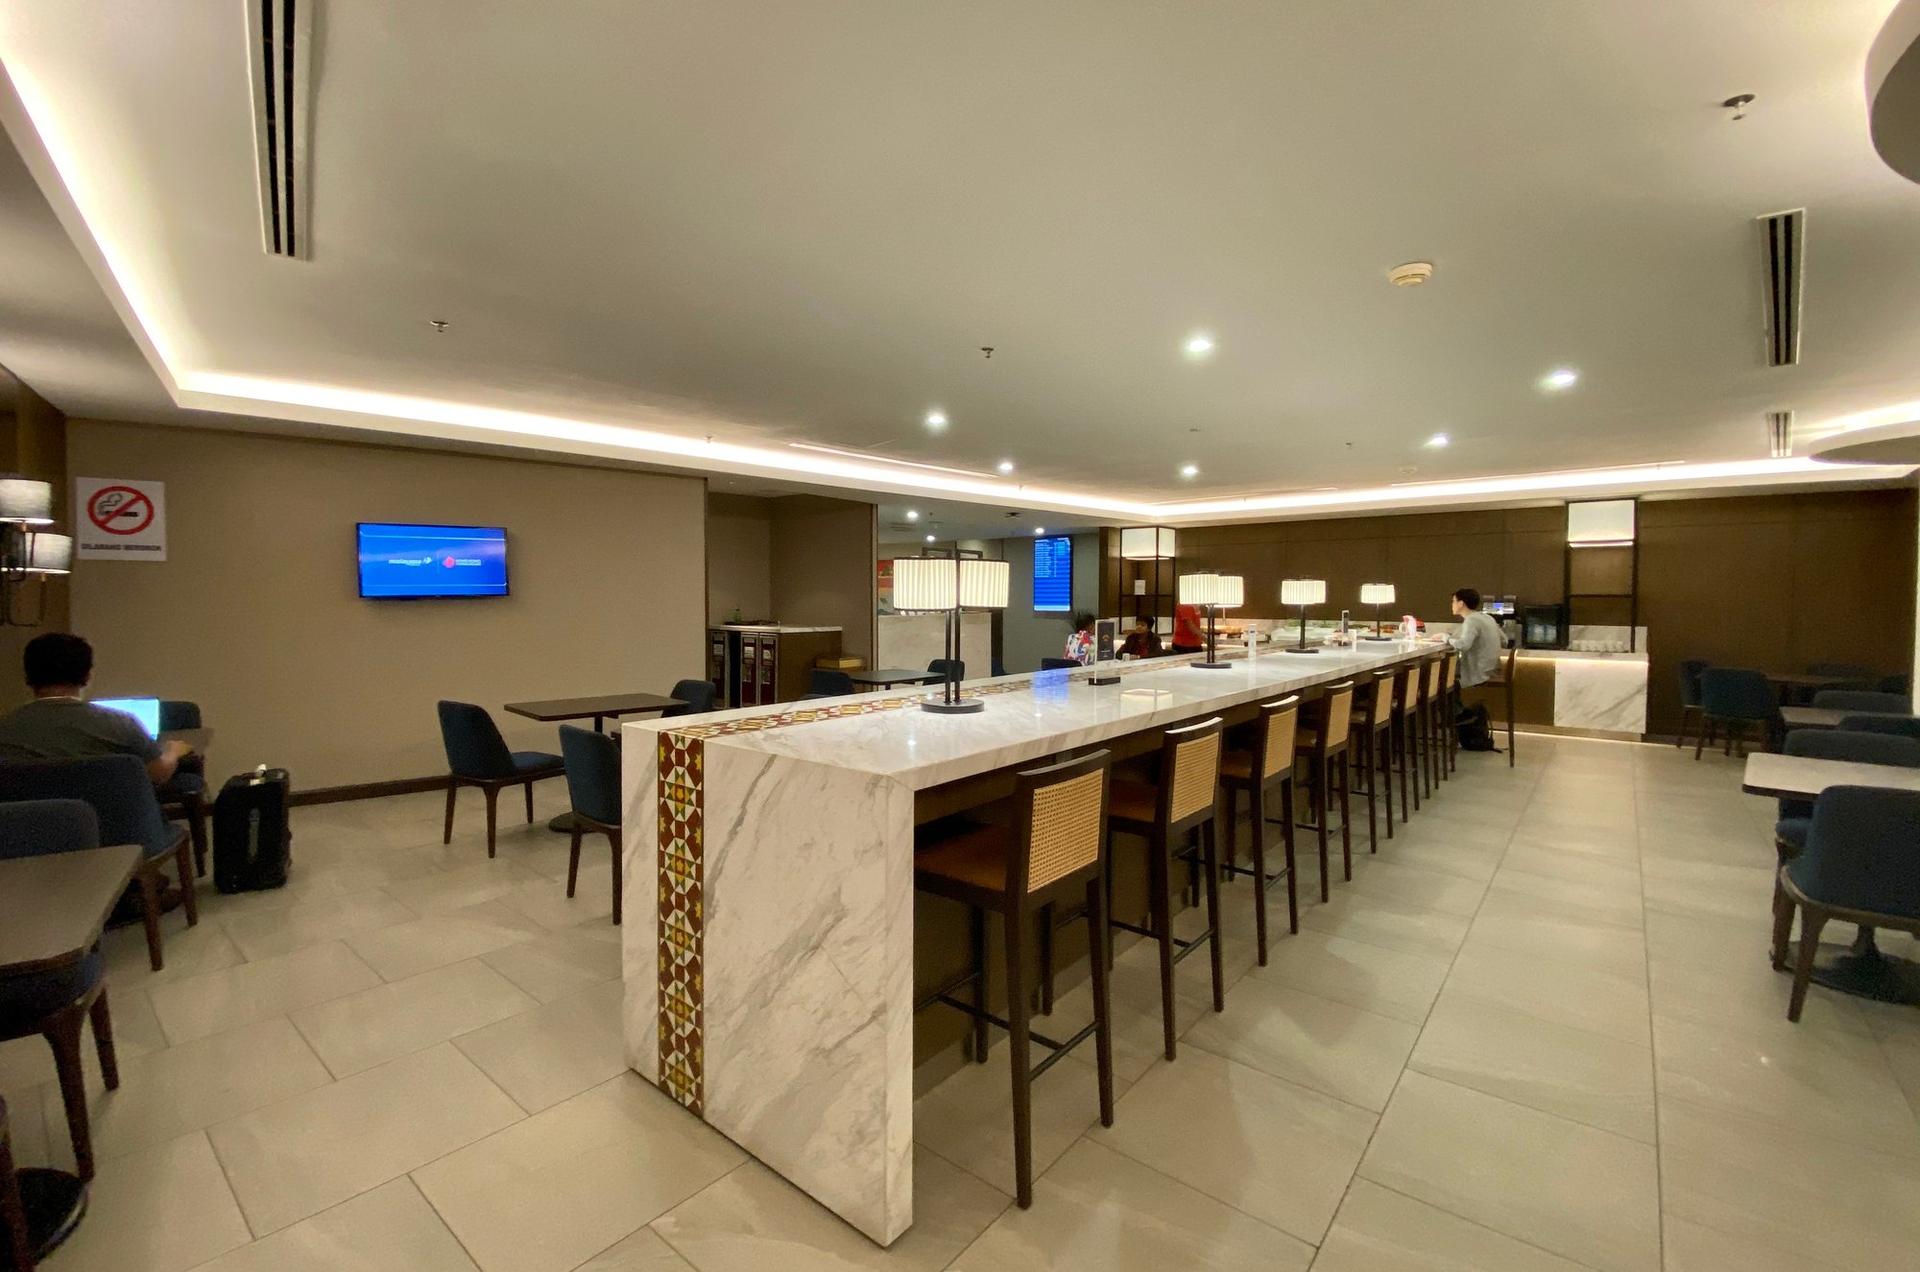 Malaysia Airlines Golden Lounge (Domestic) image 3 of 6